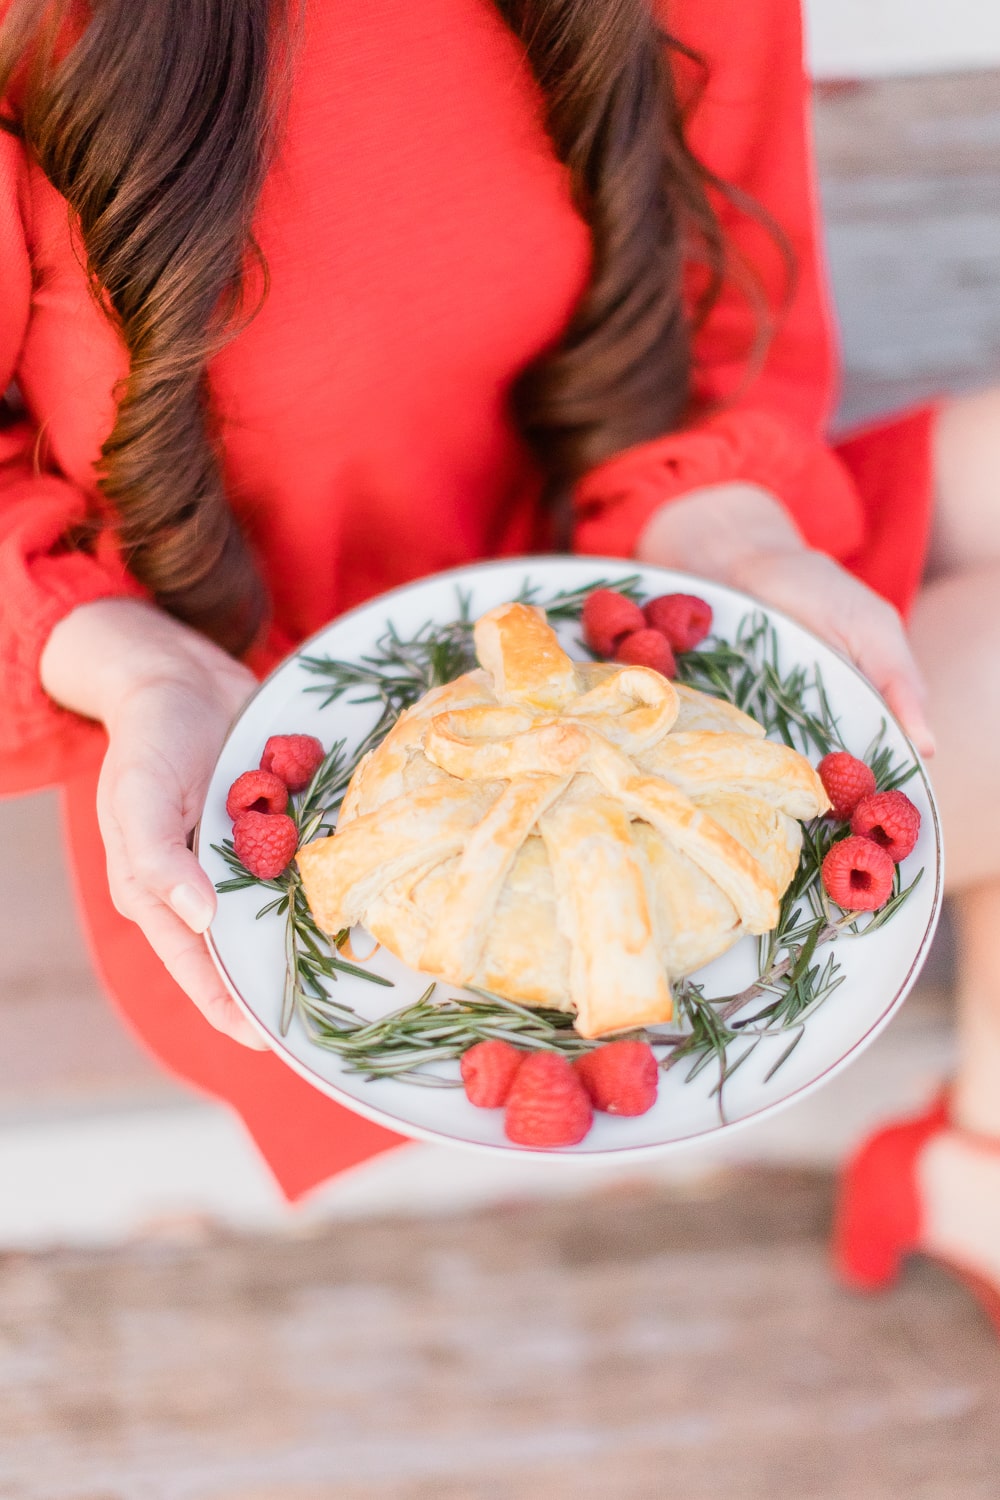 Baked brie with jelly recipe by blogger Stephanie Ziajka on Diary of a Debutante